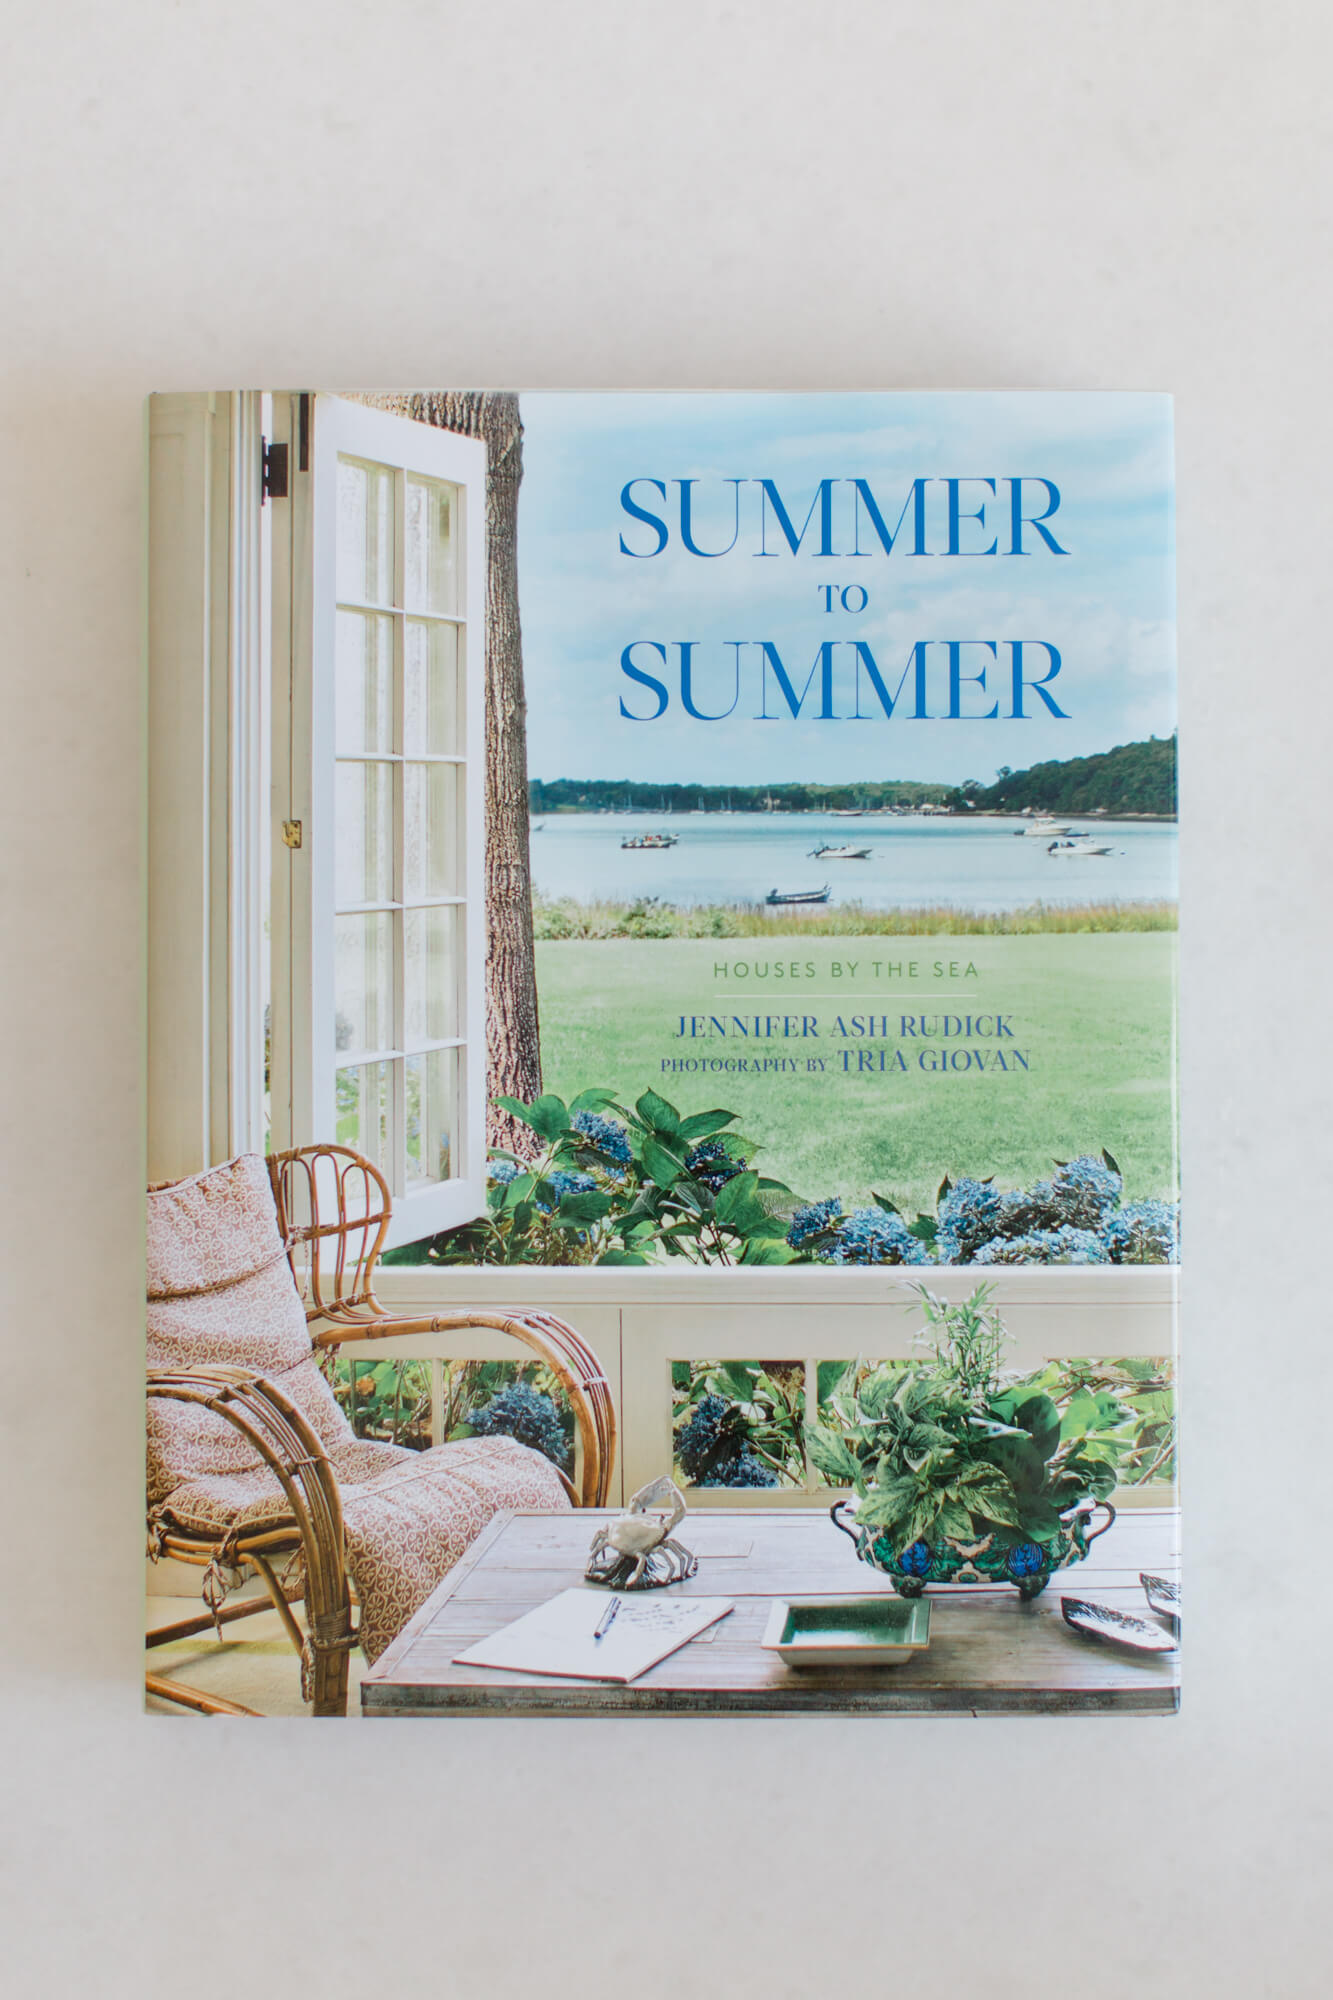 A Wonderful New Coffee Table Book: Summer to Summer - York Avenue